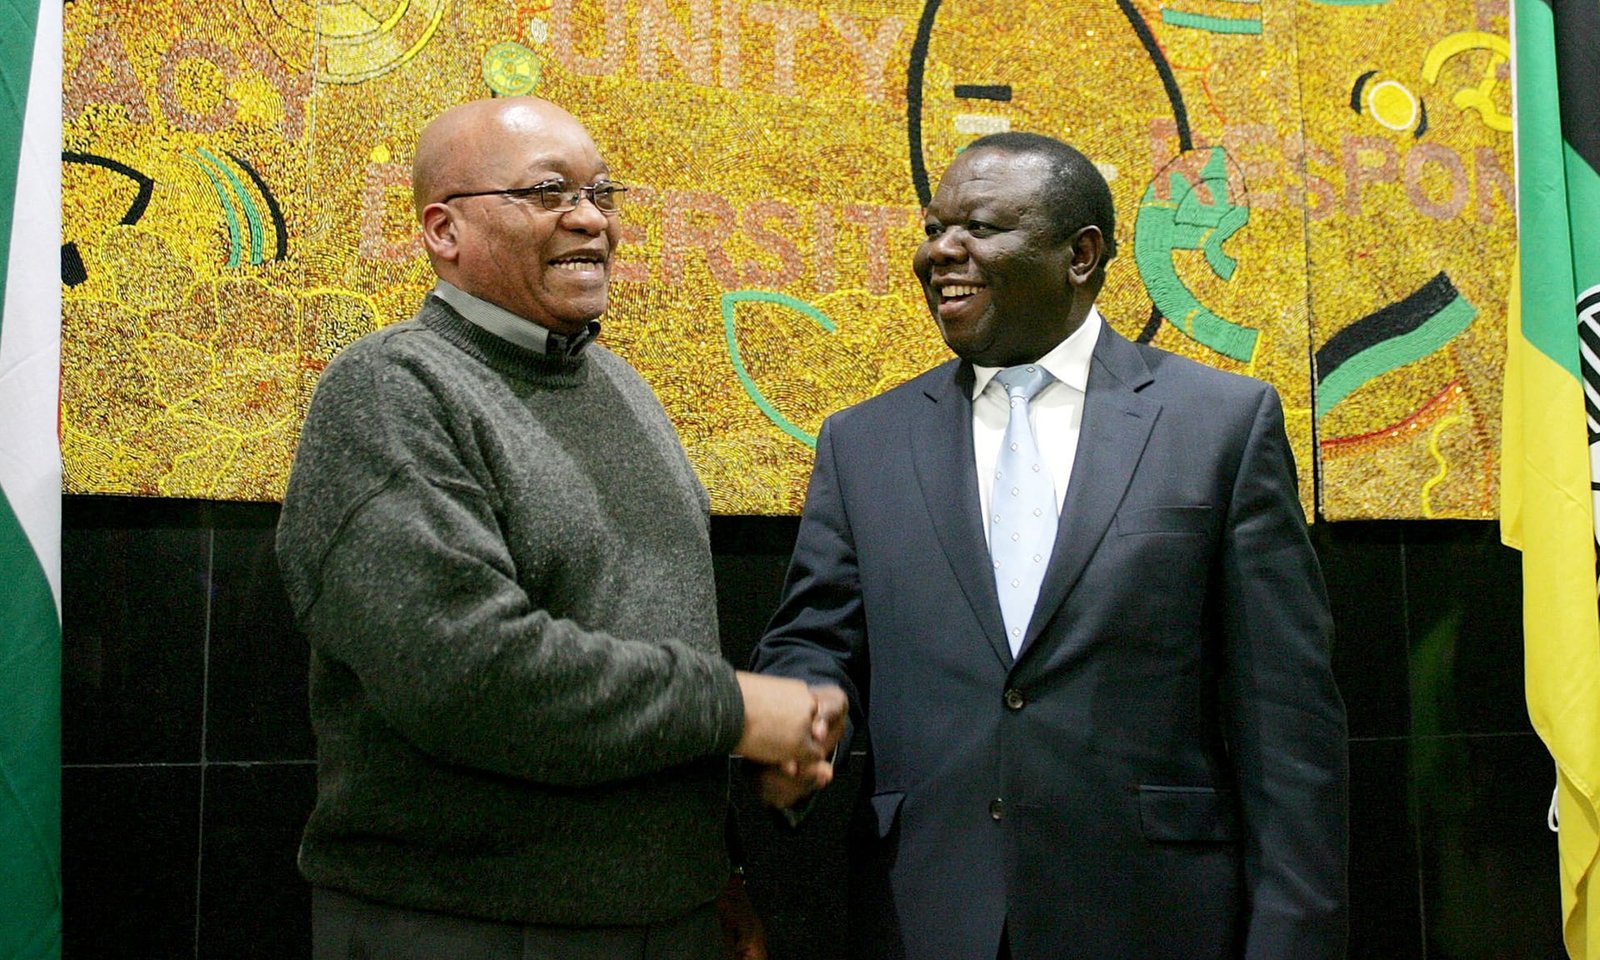 South African leader Jacob Zuma shakes hands with Tsvangirai in Johannesburg at the African National Congress Headquarters in 2009 | Report Focus News